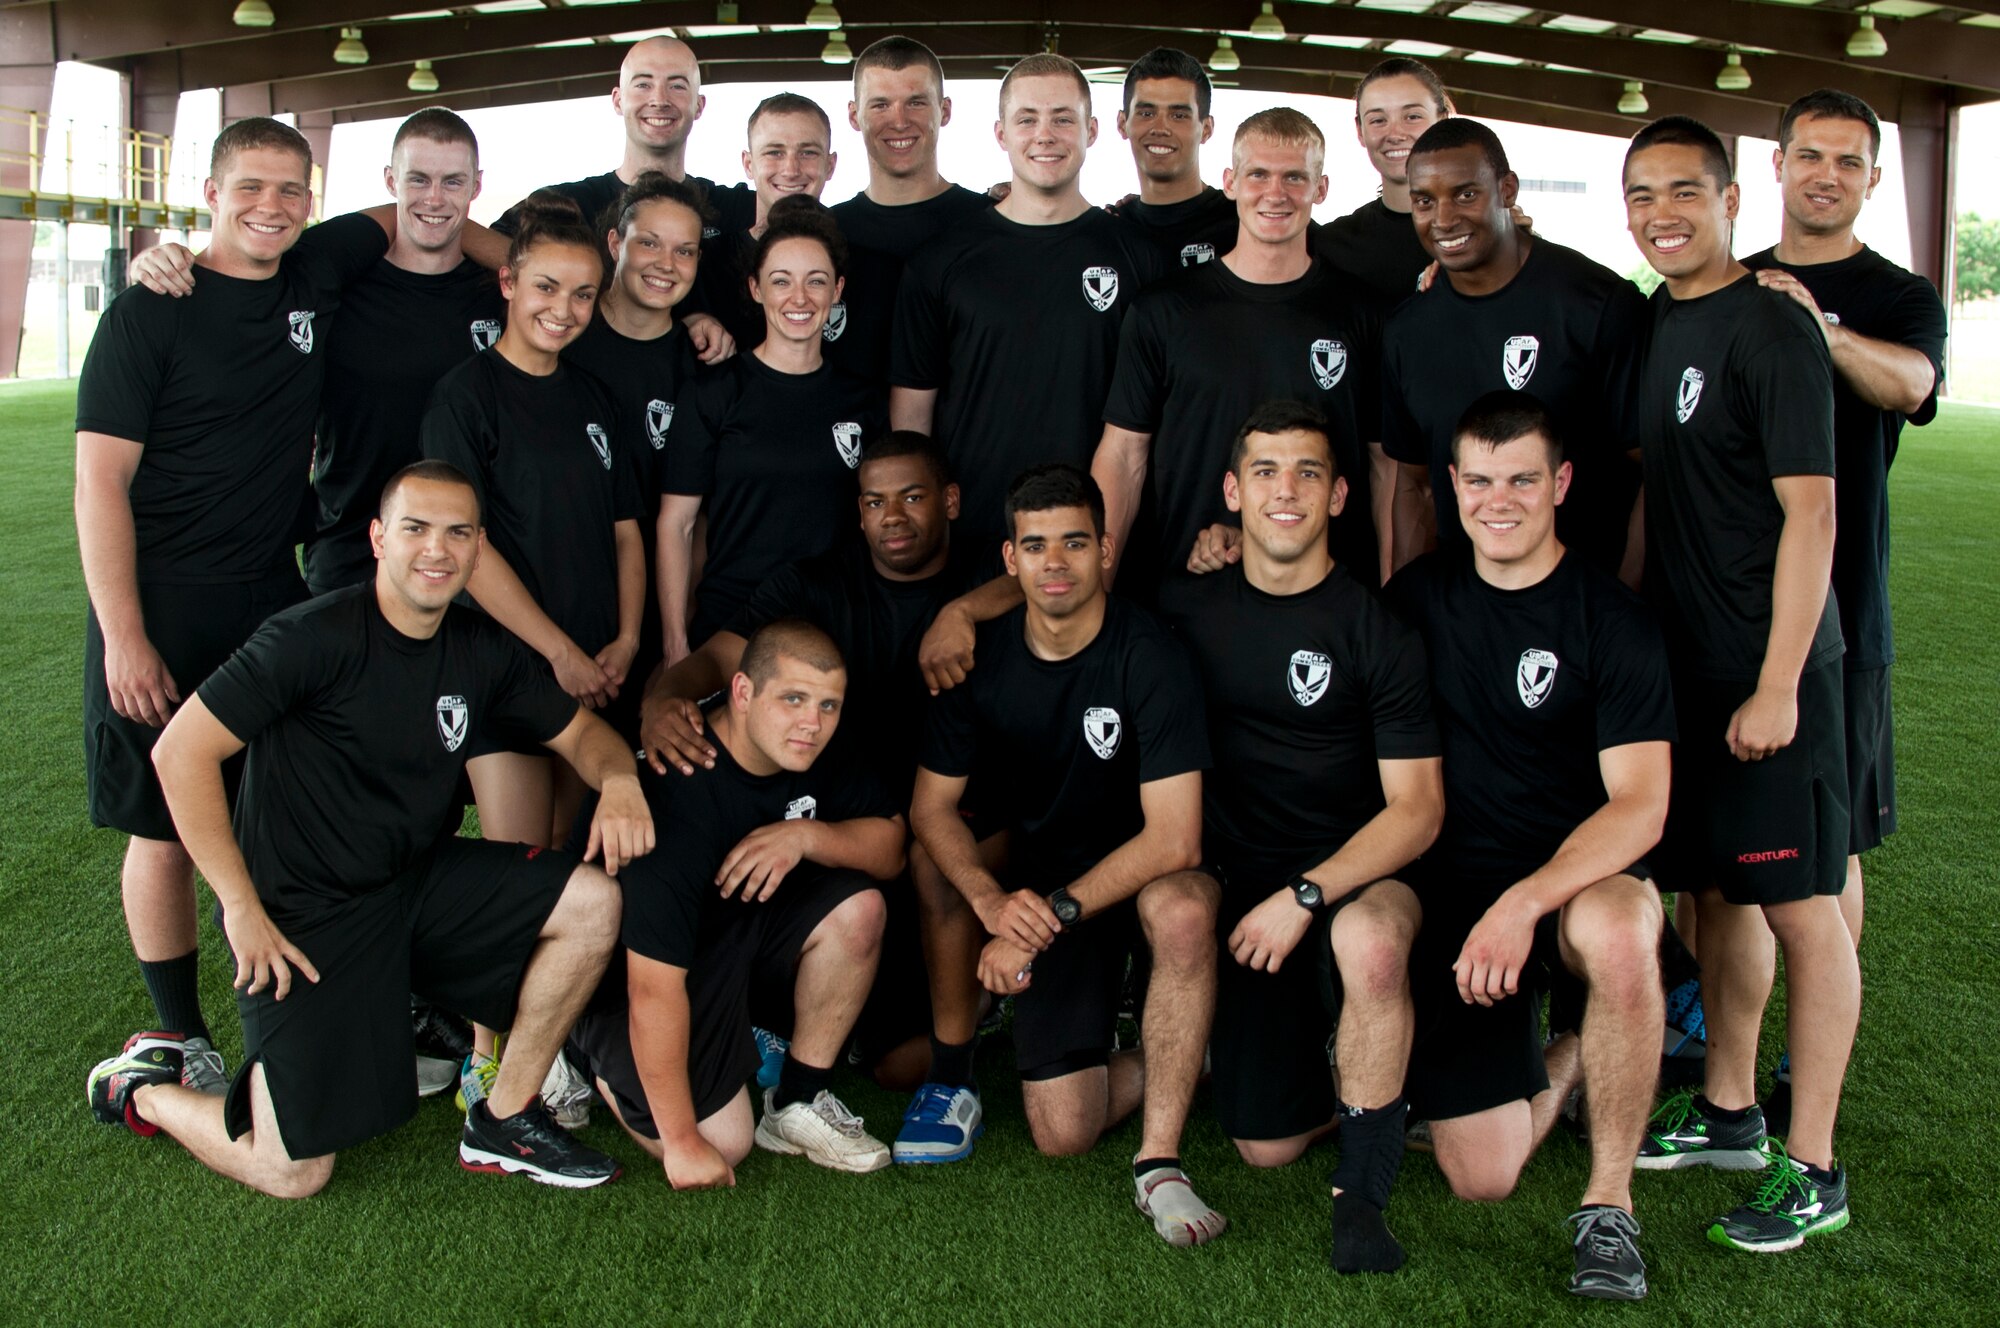 Air Force Reserve Officer Training Corps instructors pose for a group photo after teaching a course during combatives training at Maxwell Air Force Base, May 29, 2014. The instructors themselves are ROTC cadets who, after completing field training the previous year, volunteer to become certified instructors so they can return to instruct cadets currently going through field training. (U.S. Air Force Photo by Staff Sgt. Gregory Brook)